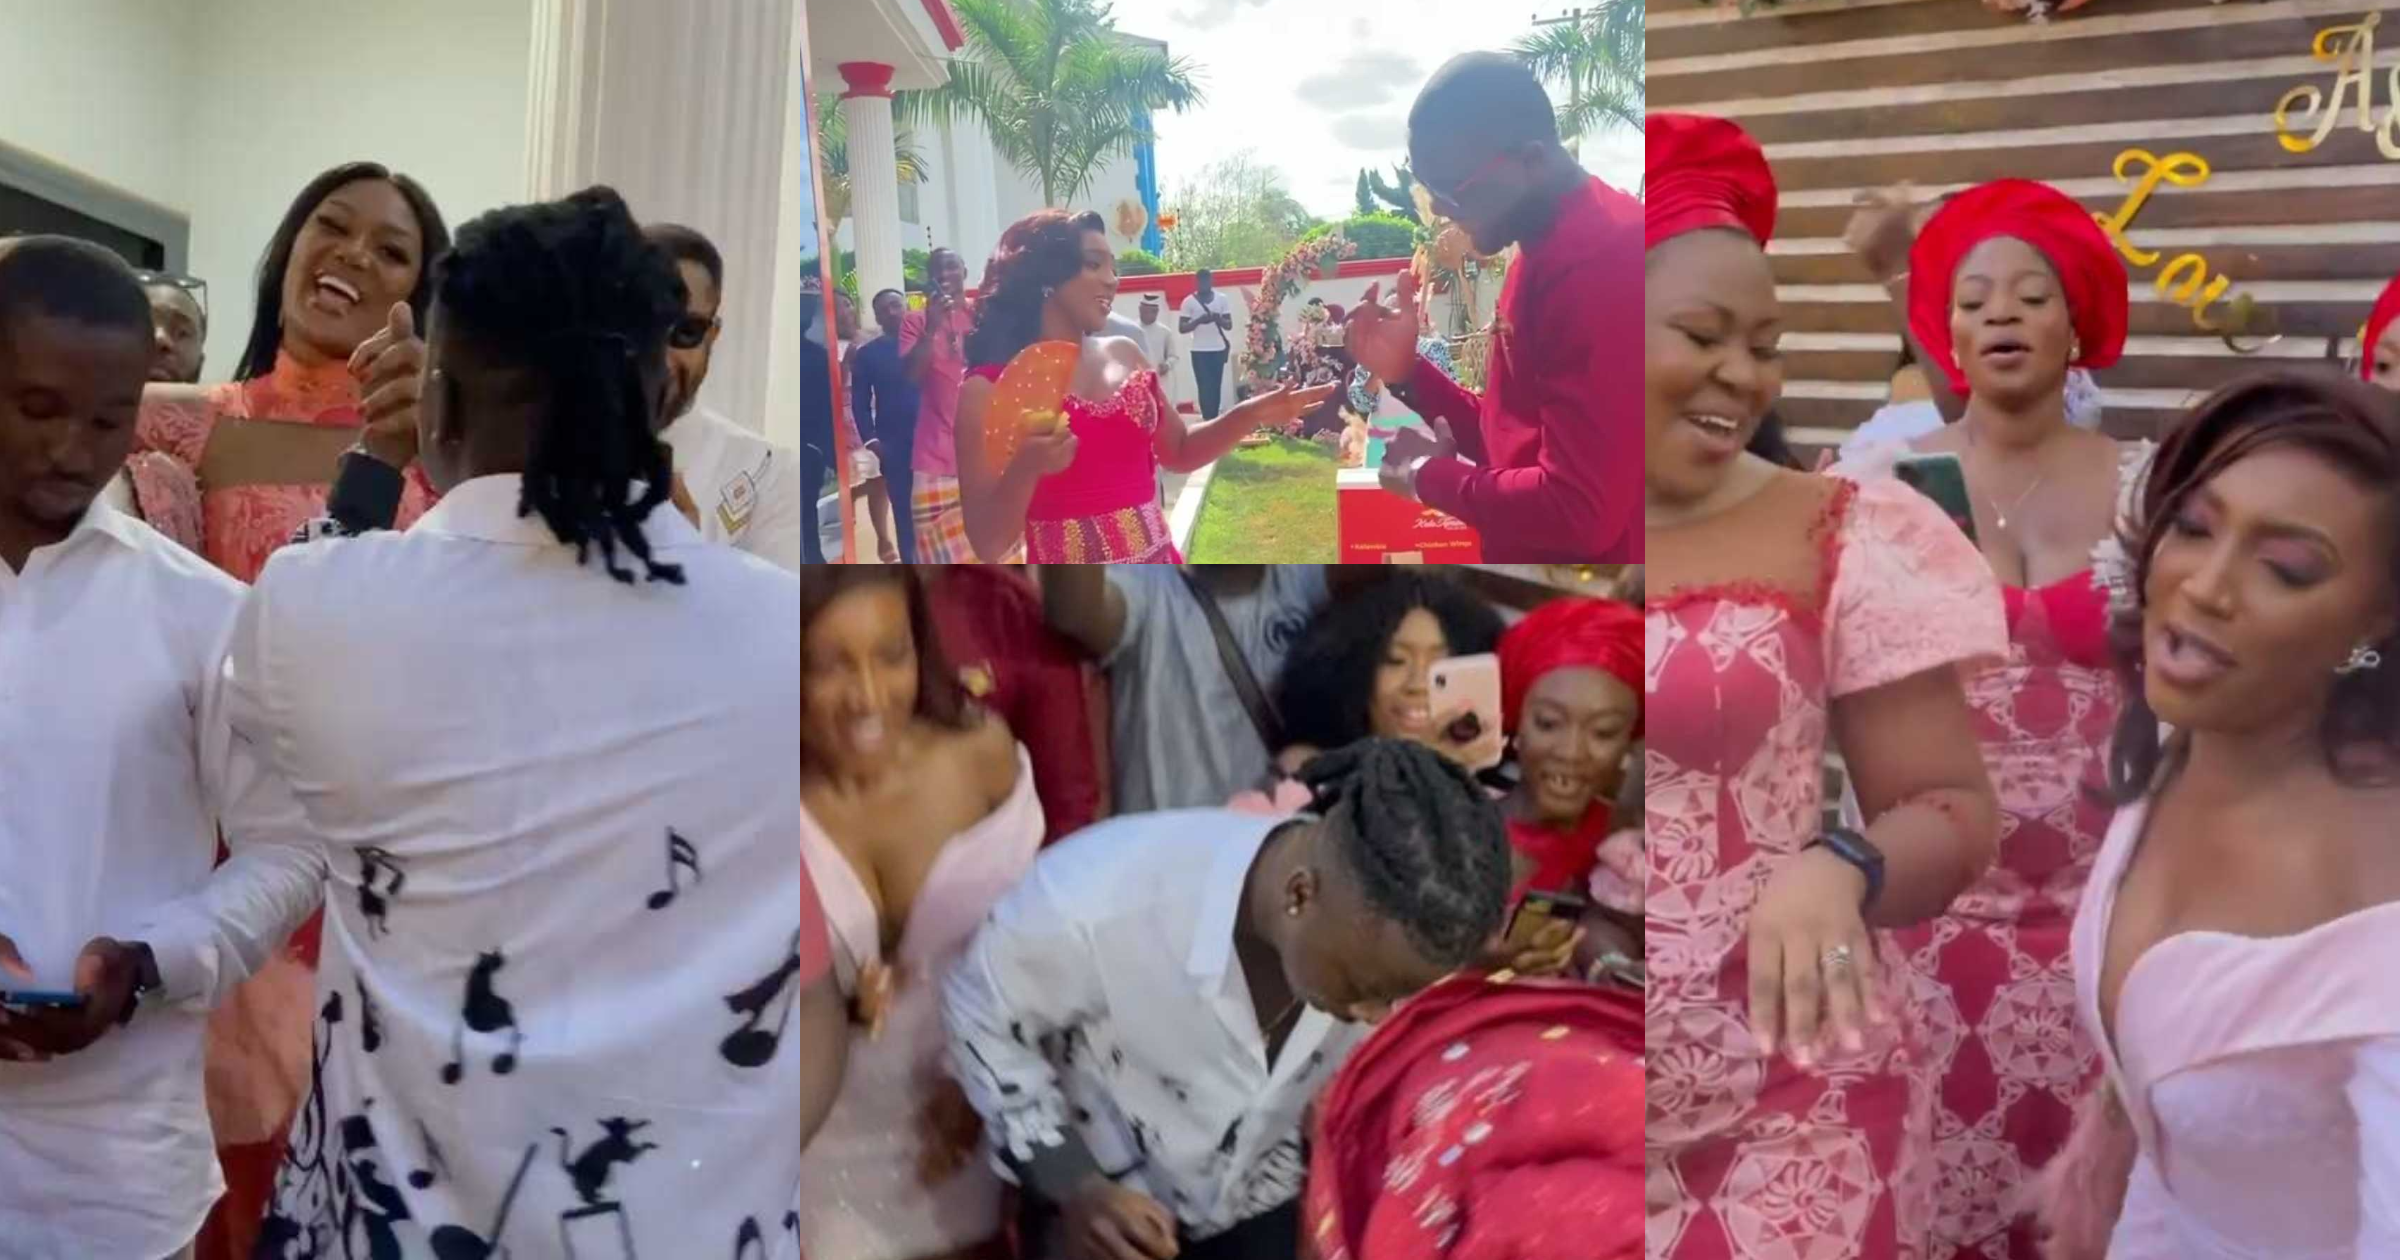 Wedding of Yvonne Okoro's younger sister goes gaga as Stonebwoy performs Putuu at reception